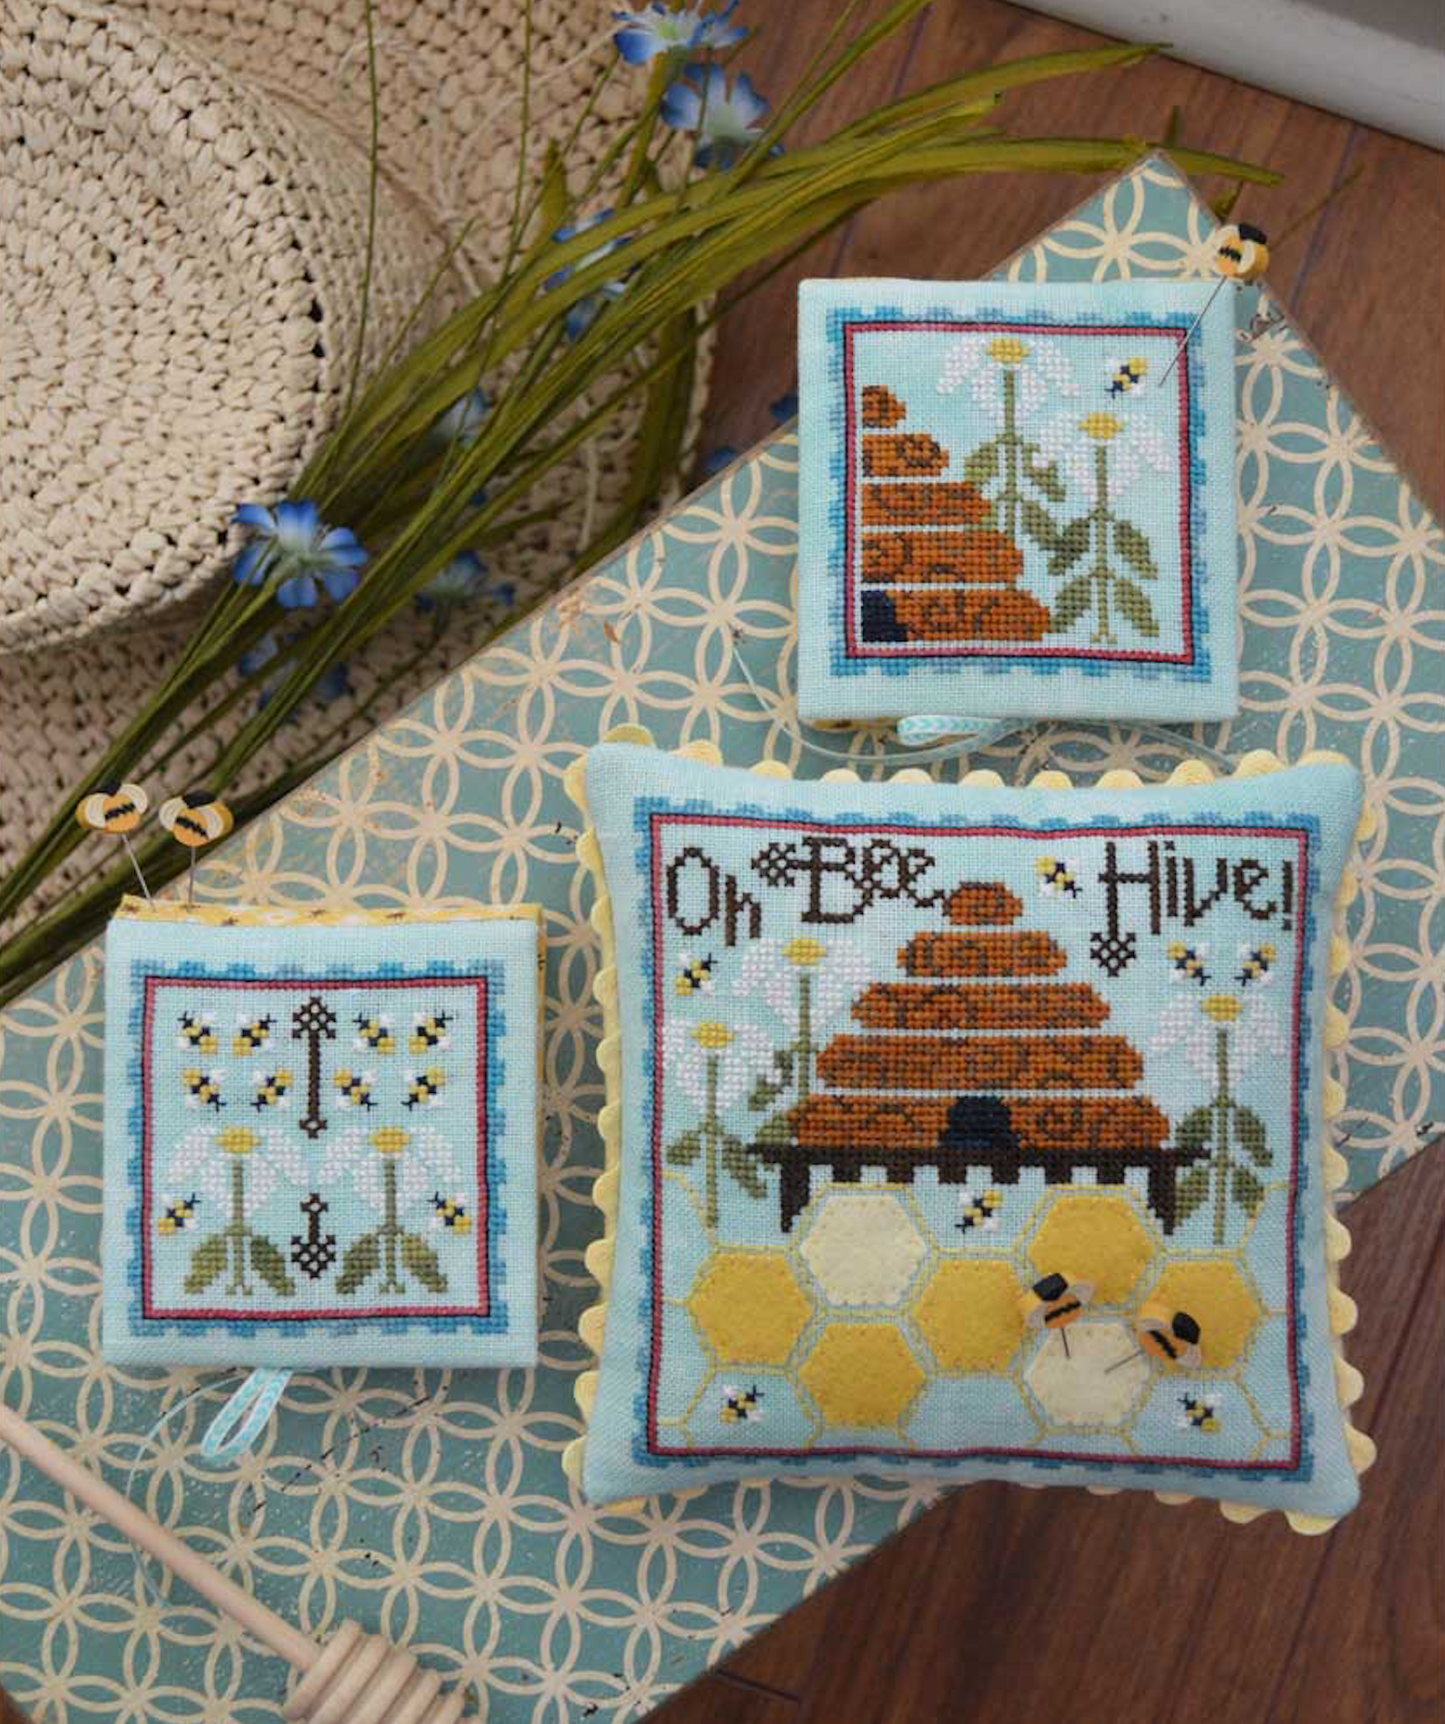 OH BEE HIVE Pincushion, NeedleBook & Needle Park Cross Stitch Embroidery Kit from Hands On Design: Pattern, Linen, Floss, JABC Pins